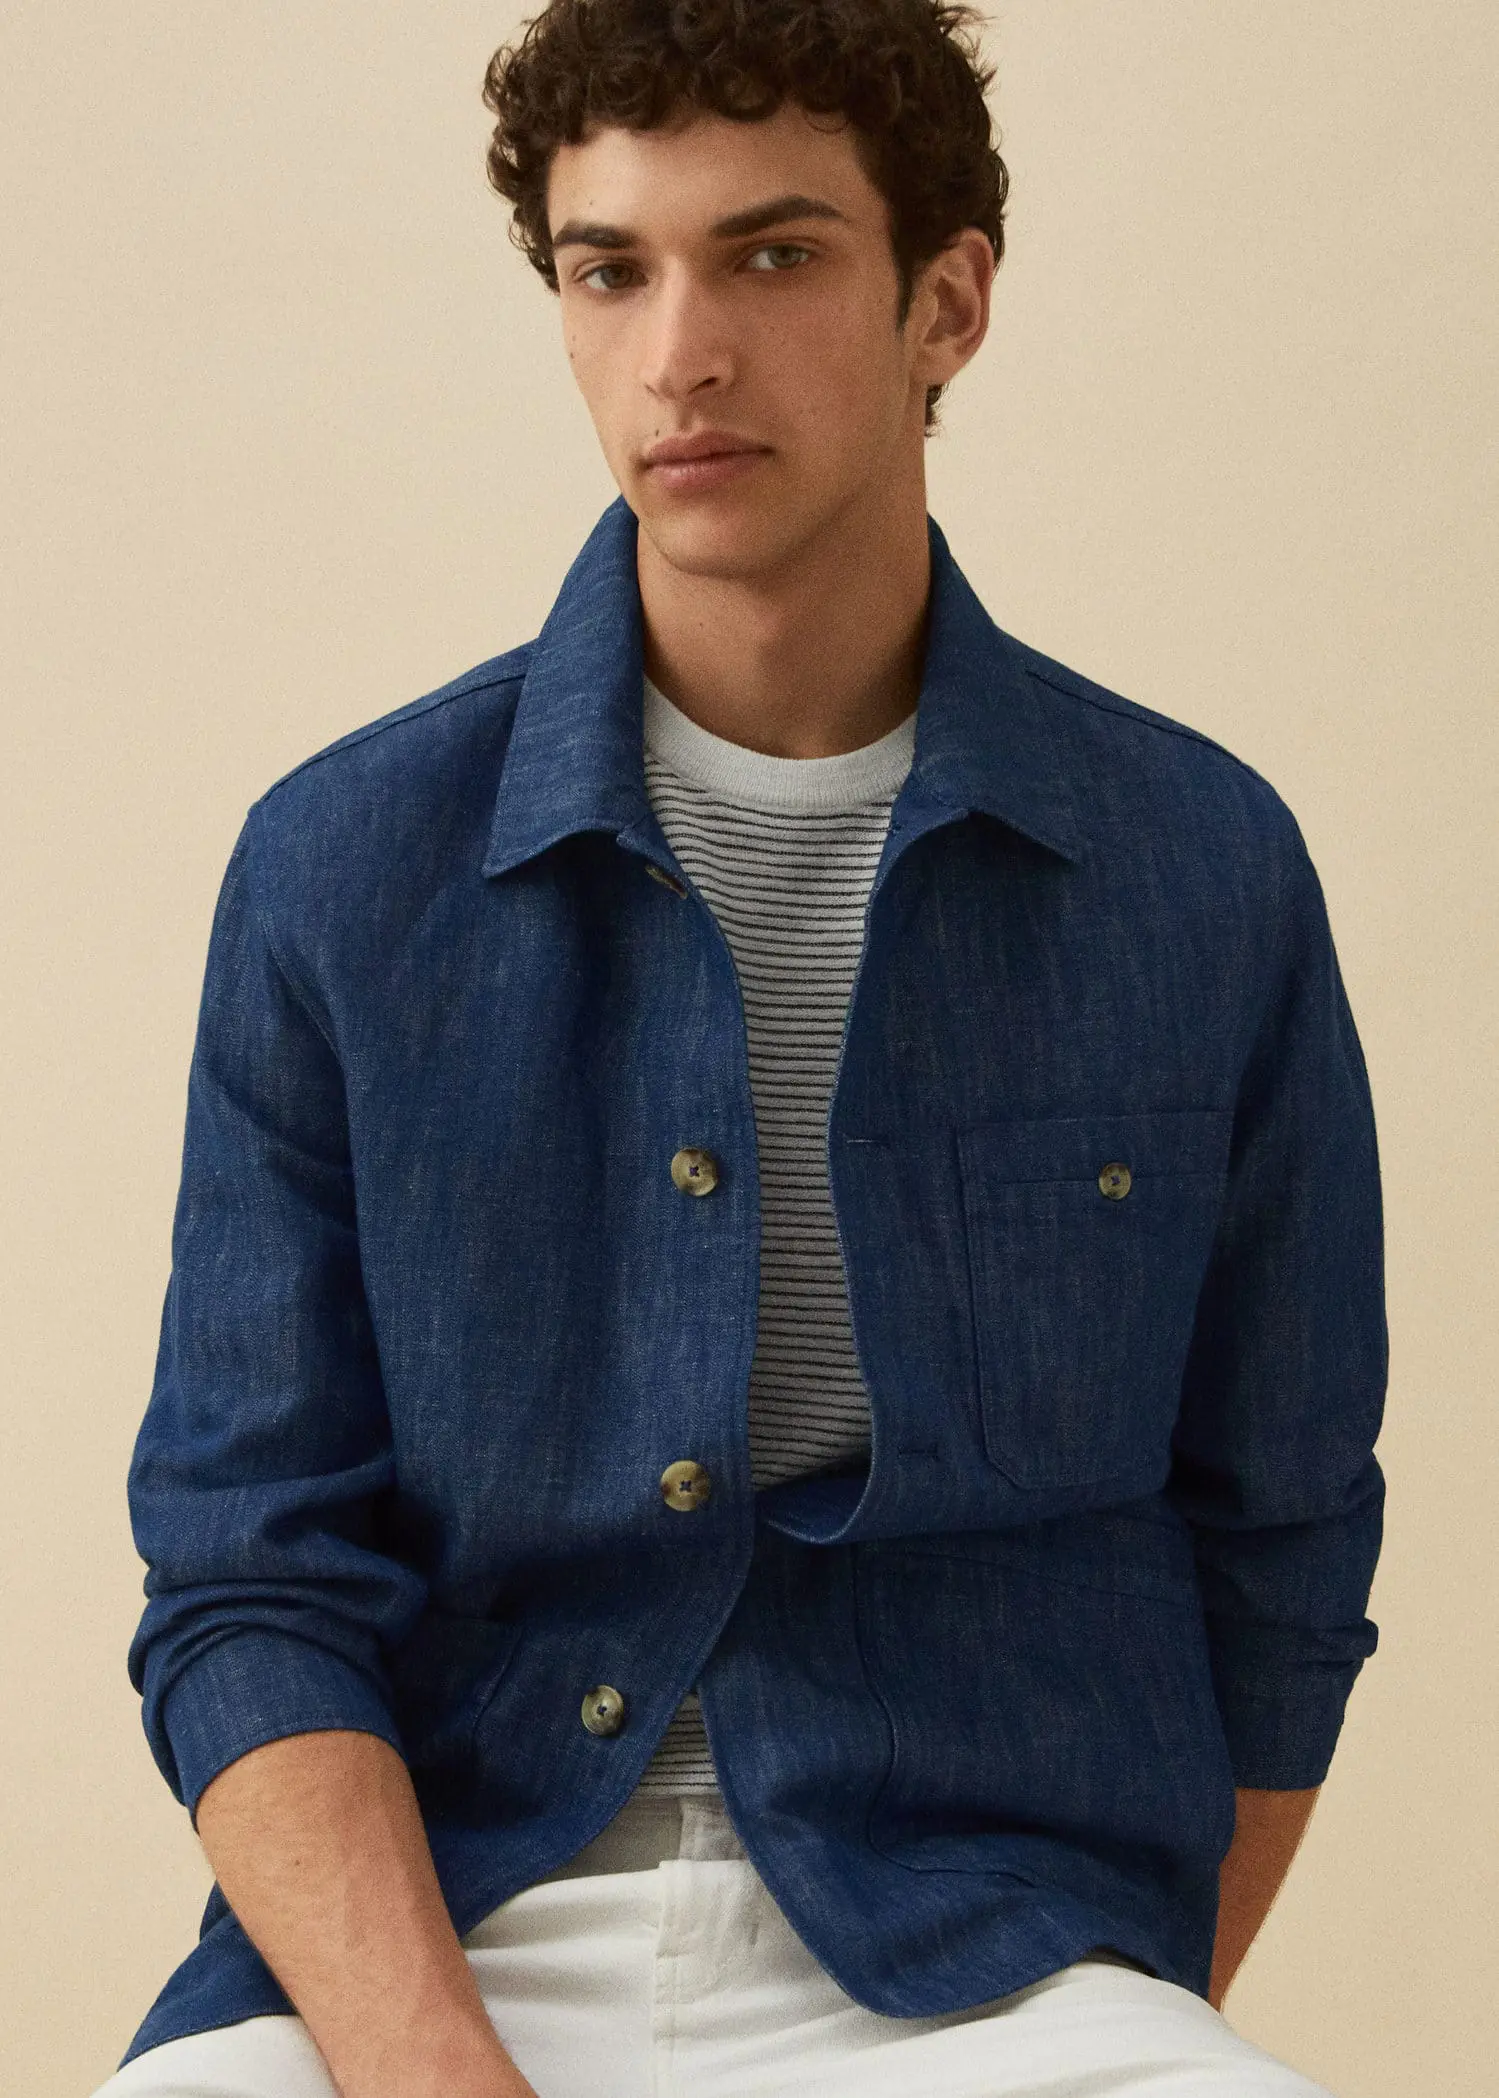 Mango Cotton-linen jacket with pockets. a young man wearing a blue jacket and striped shirt. 